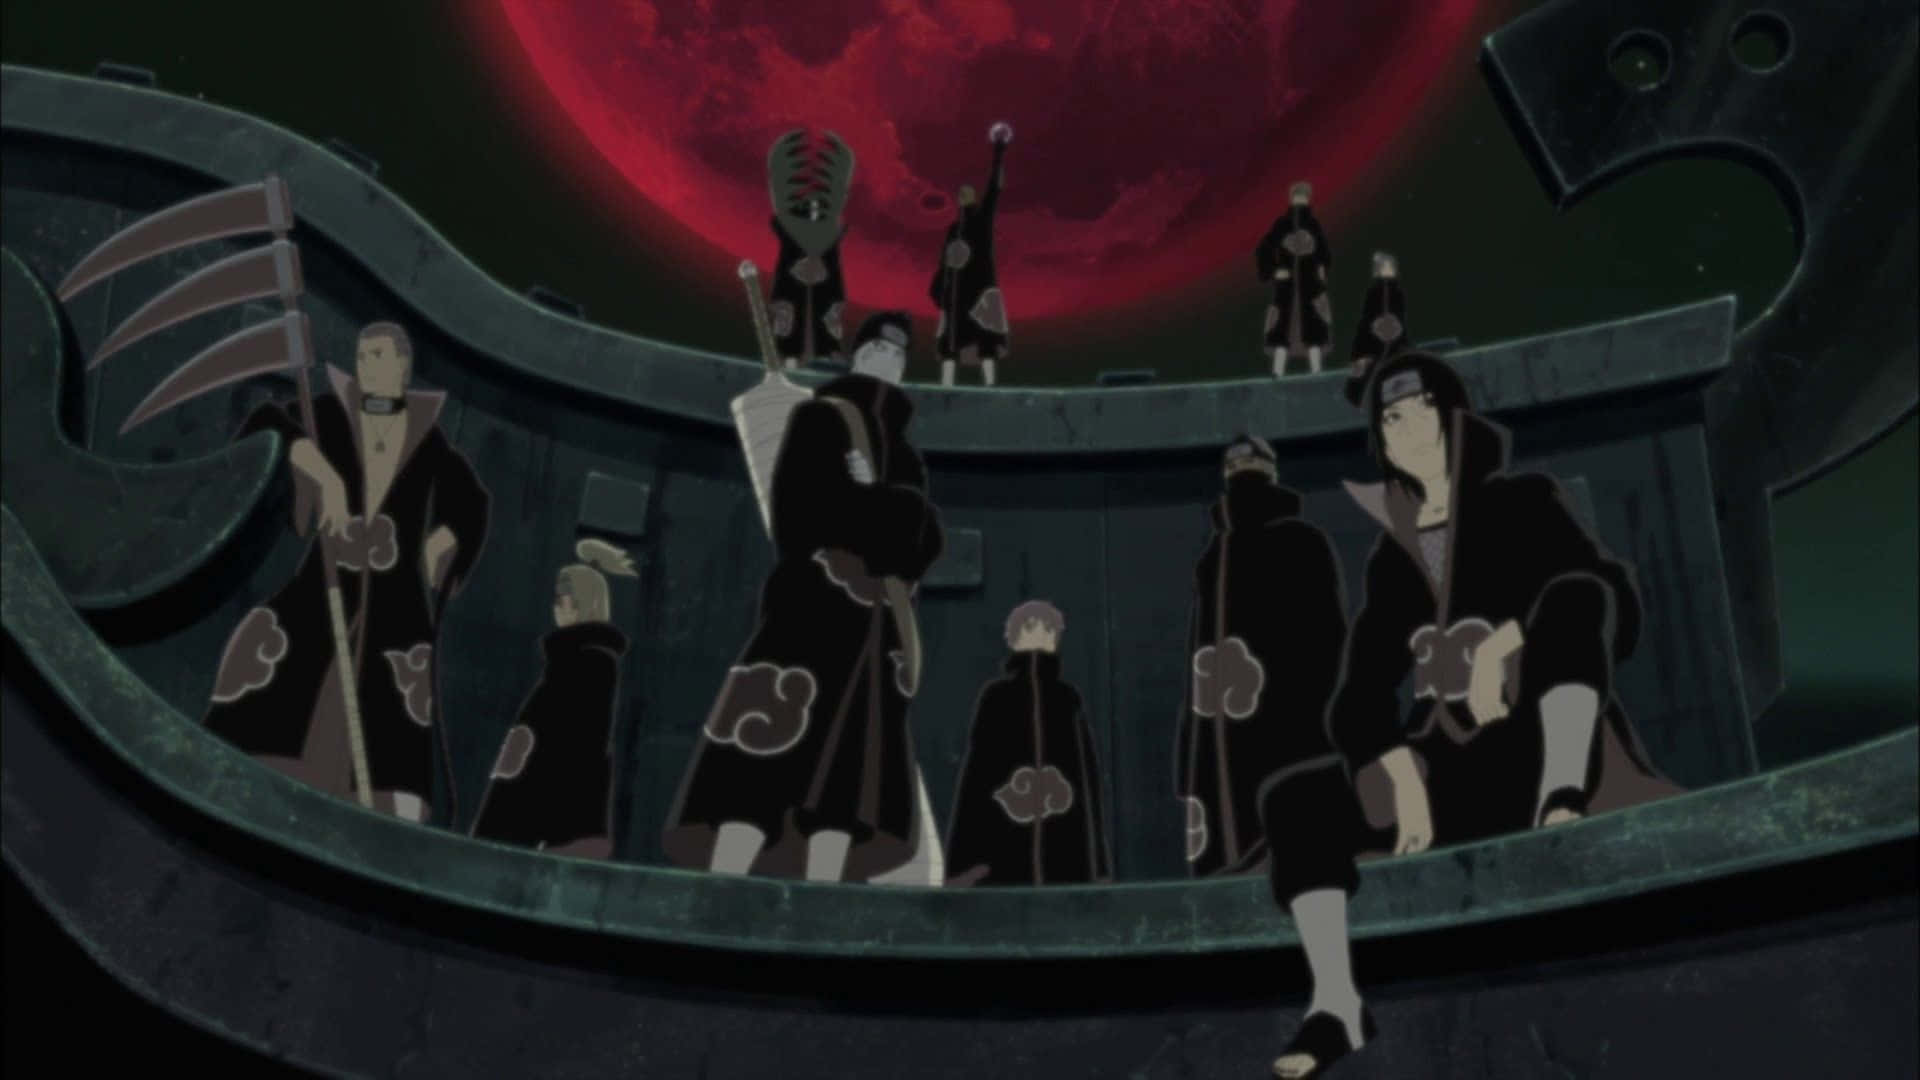 Itachi Aesthetic Sitting Down With Akatsuki Members Under Big Red Moon Background